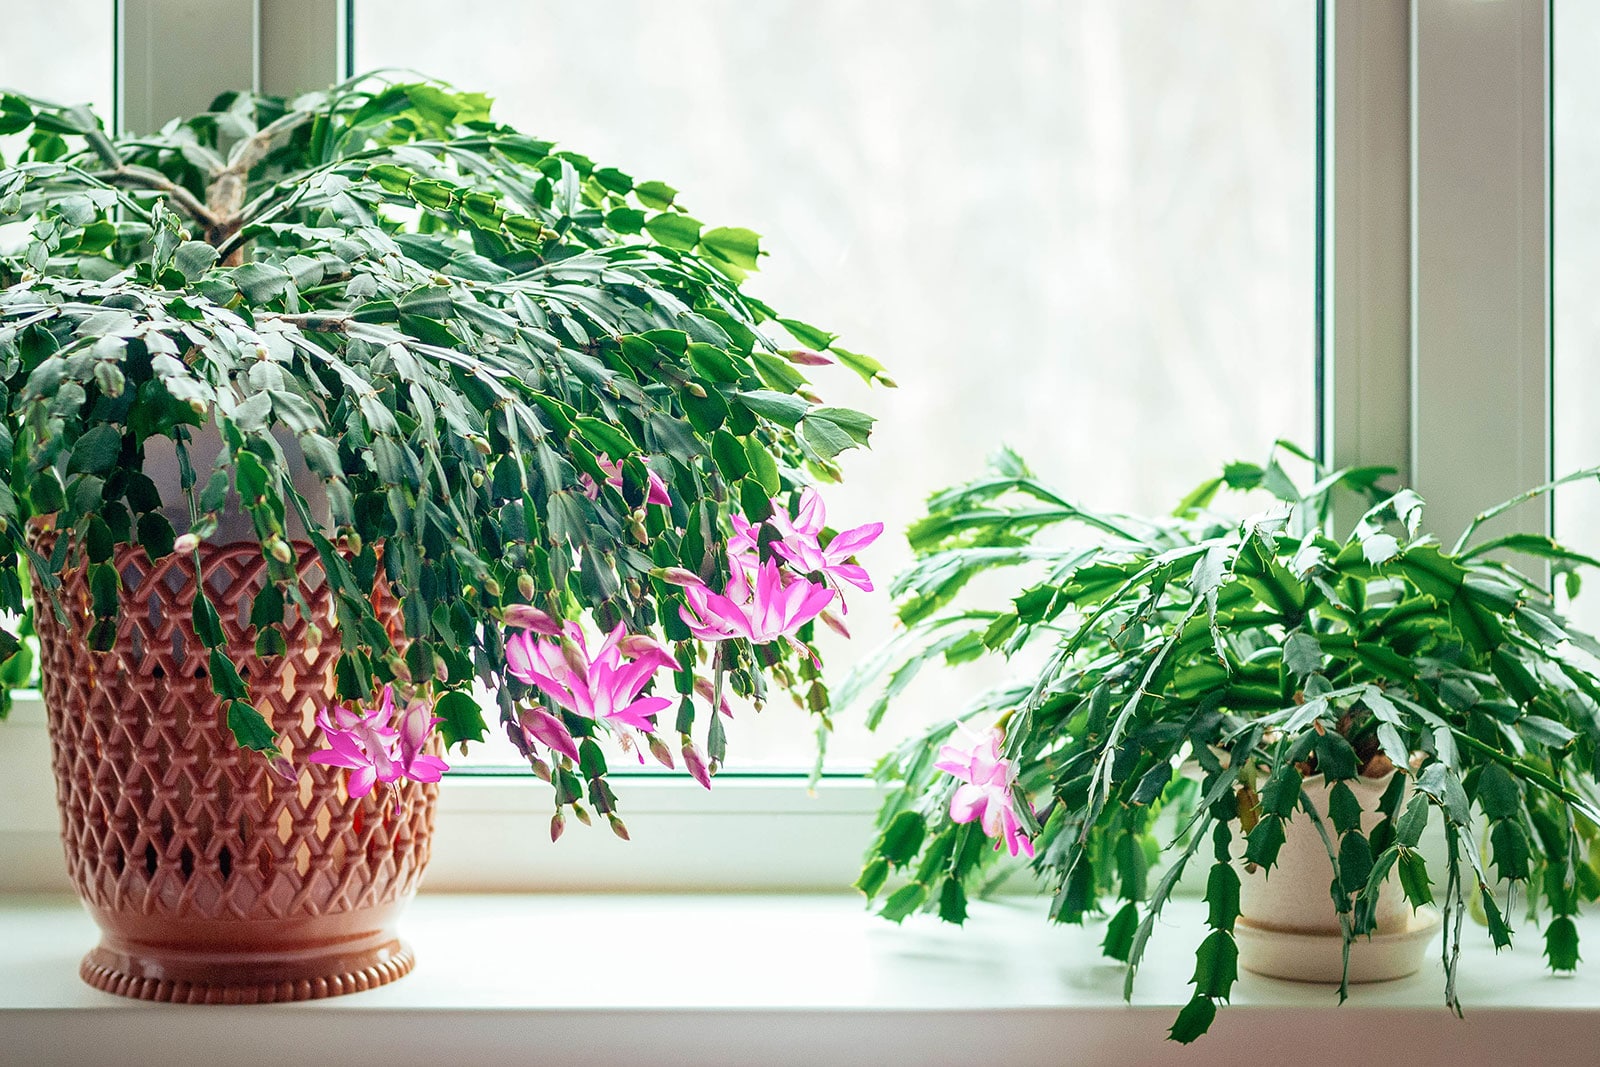 Two blooming Thanksgiving cactus houseplants in front of a window, the one on the left is in a decorative large brown pot, the one on the right is in a simple small white pot